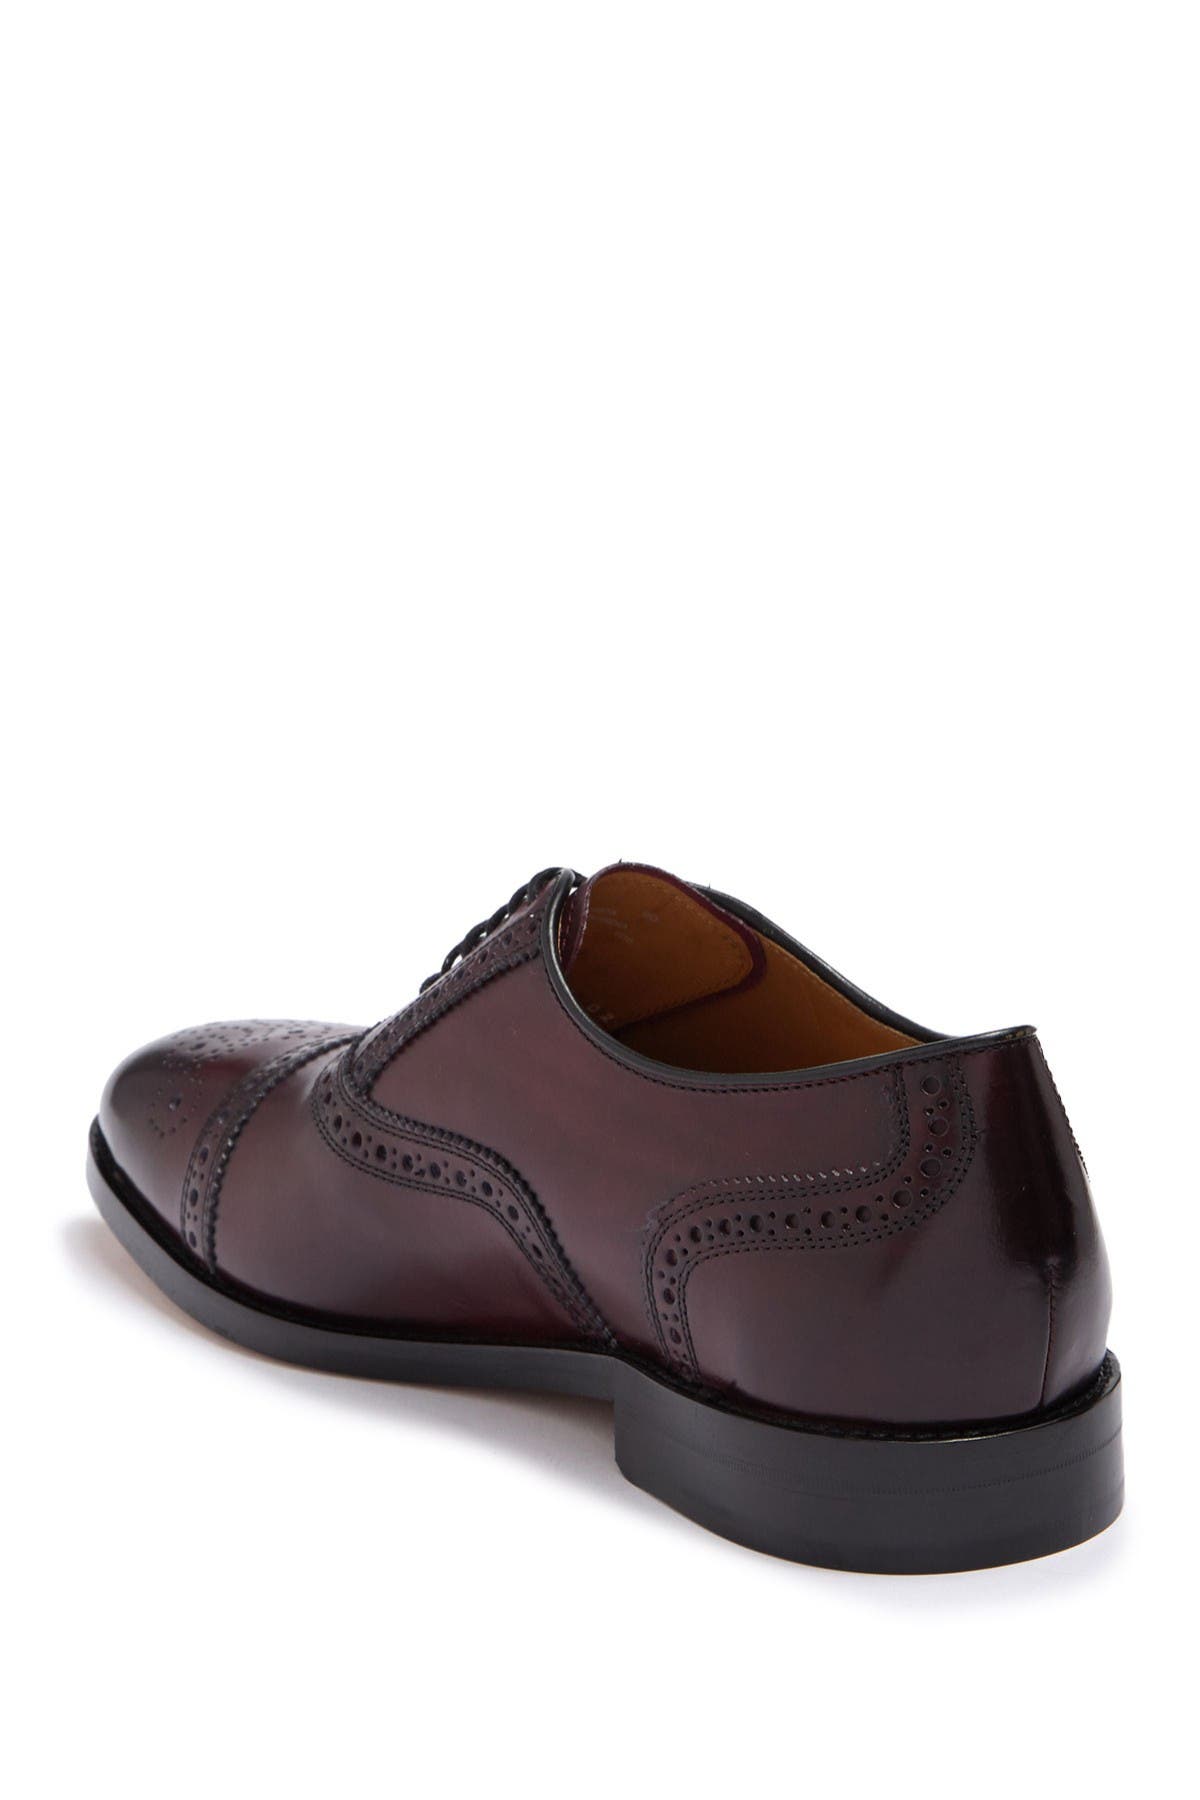 cole haan oxblood shoes